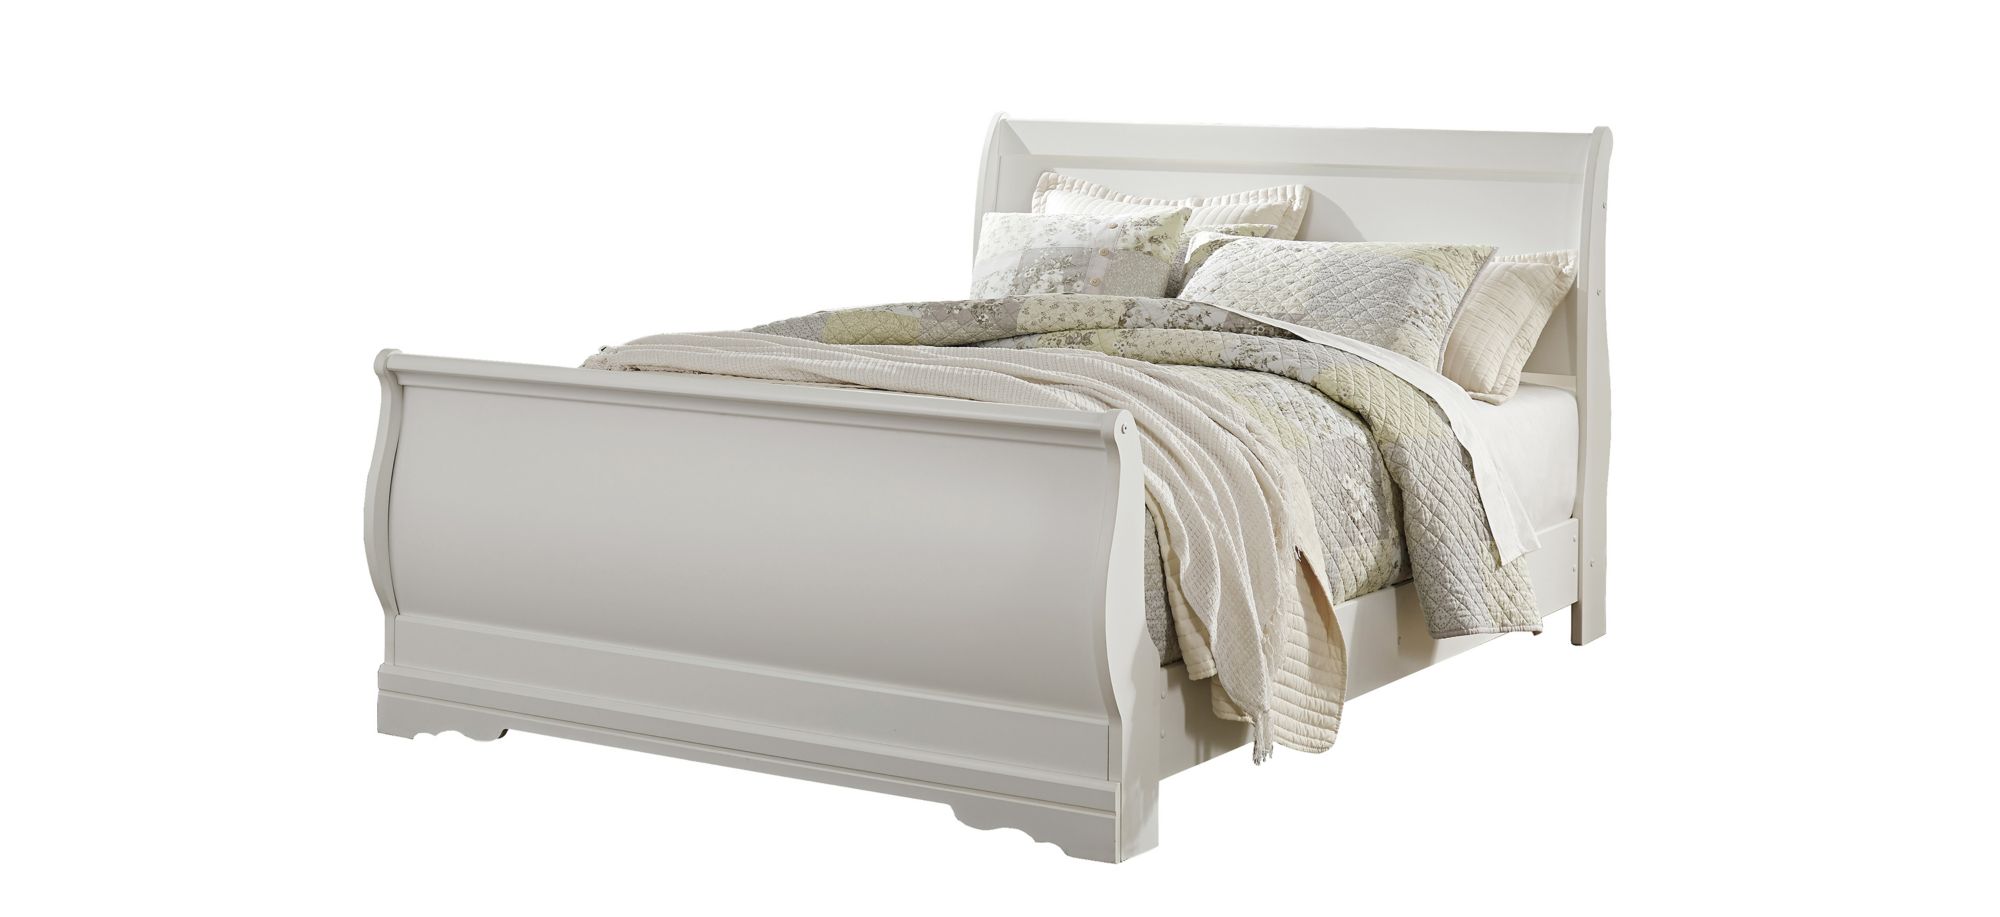 Anarasia Bed in White by Ashley Furniture